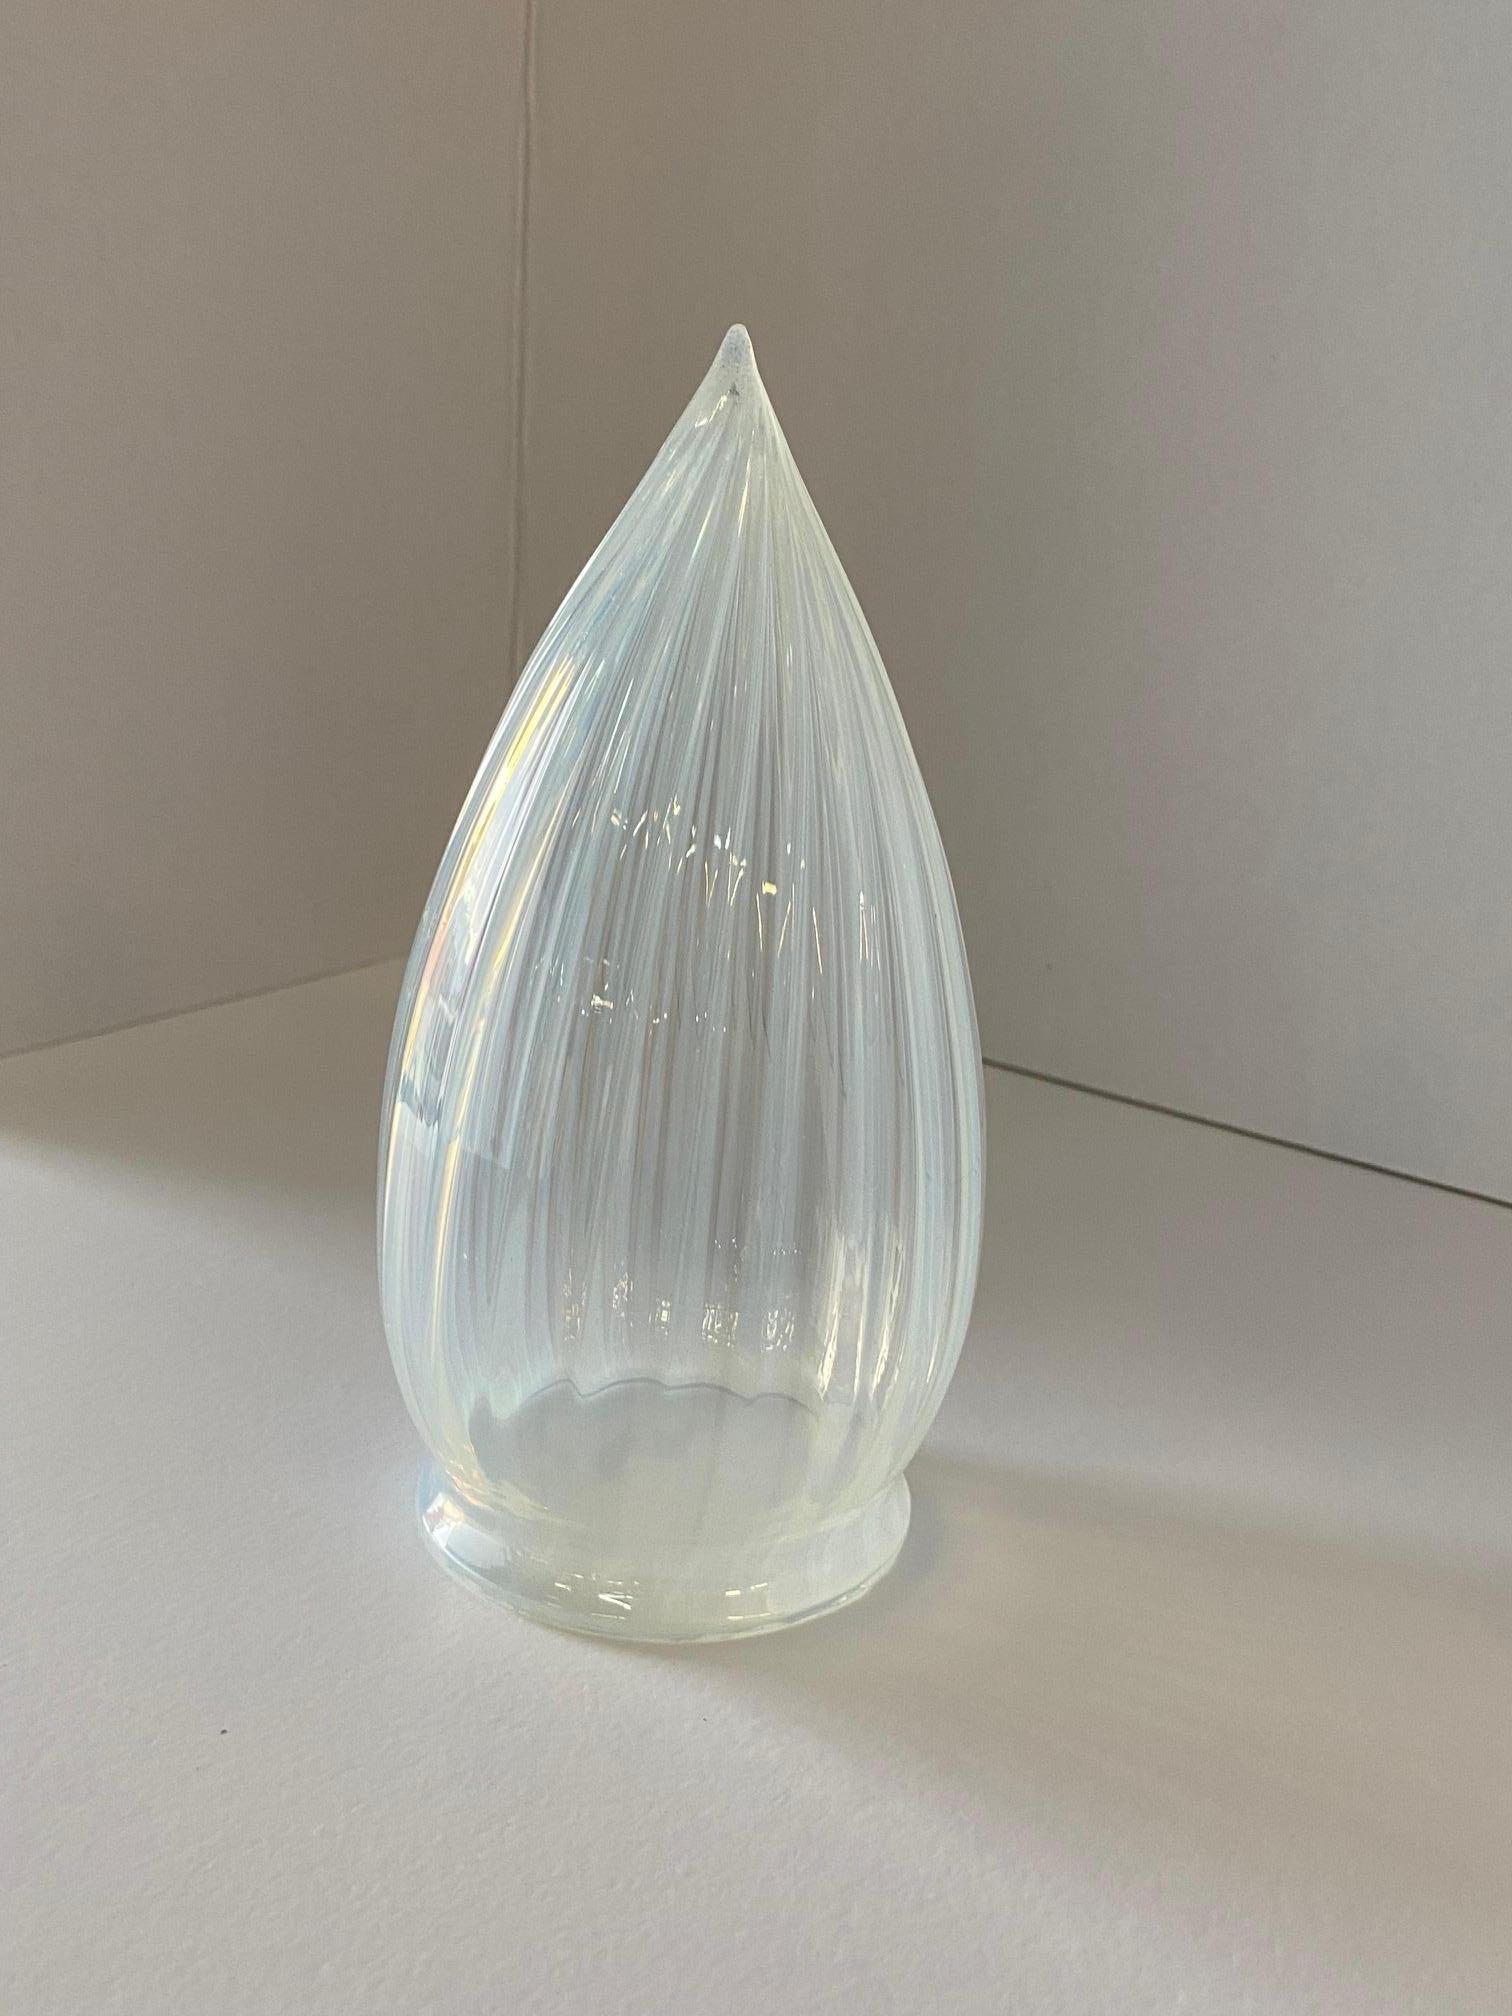 Vintage art deco vaseline opalescent teardrop swirl glass bullet shade. Heavy glass with a translucent blue hue with masterfully perfectly done hand-blown vertical etched liked swirls , circa 1960s possible made in Italy or USA in the 1960s this is